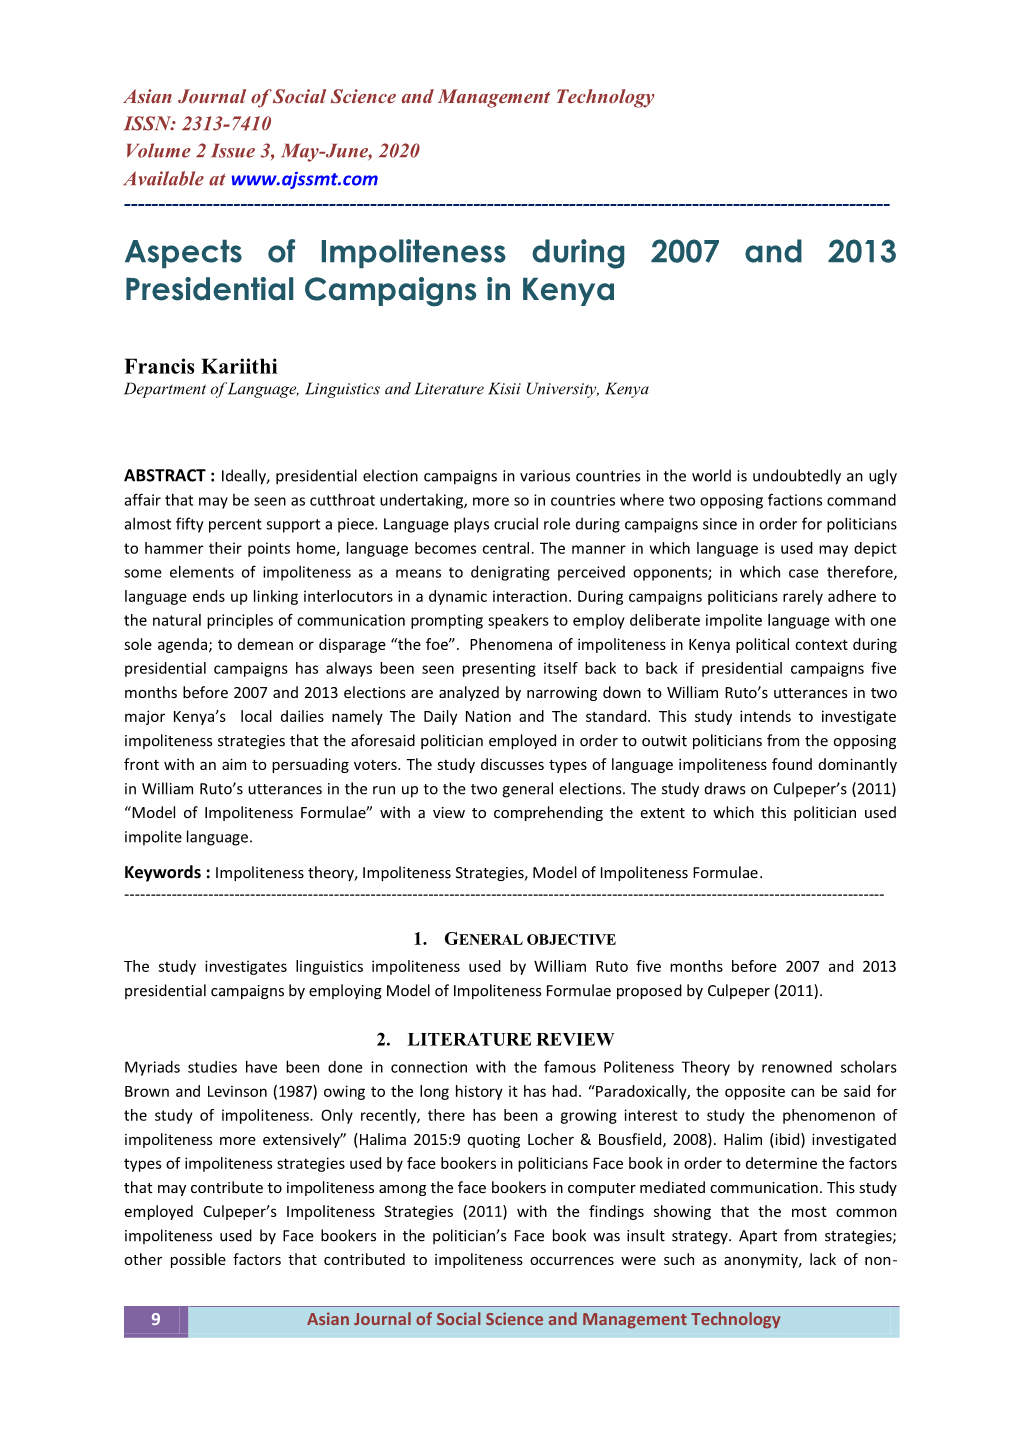 Aspects of Impoliteness During 2007 and 2013 Presidential Campaigns in Kenya